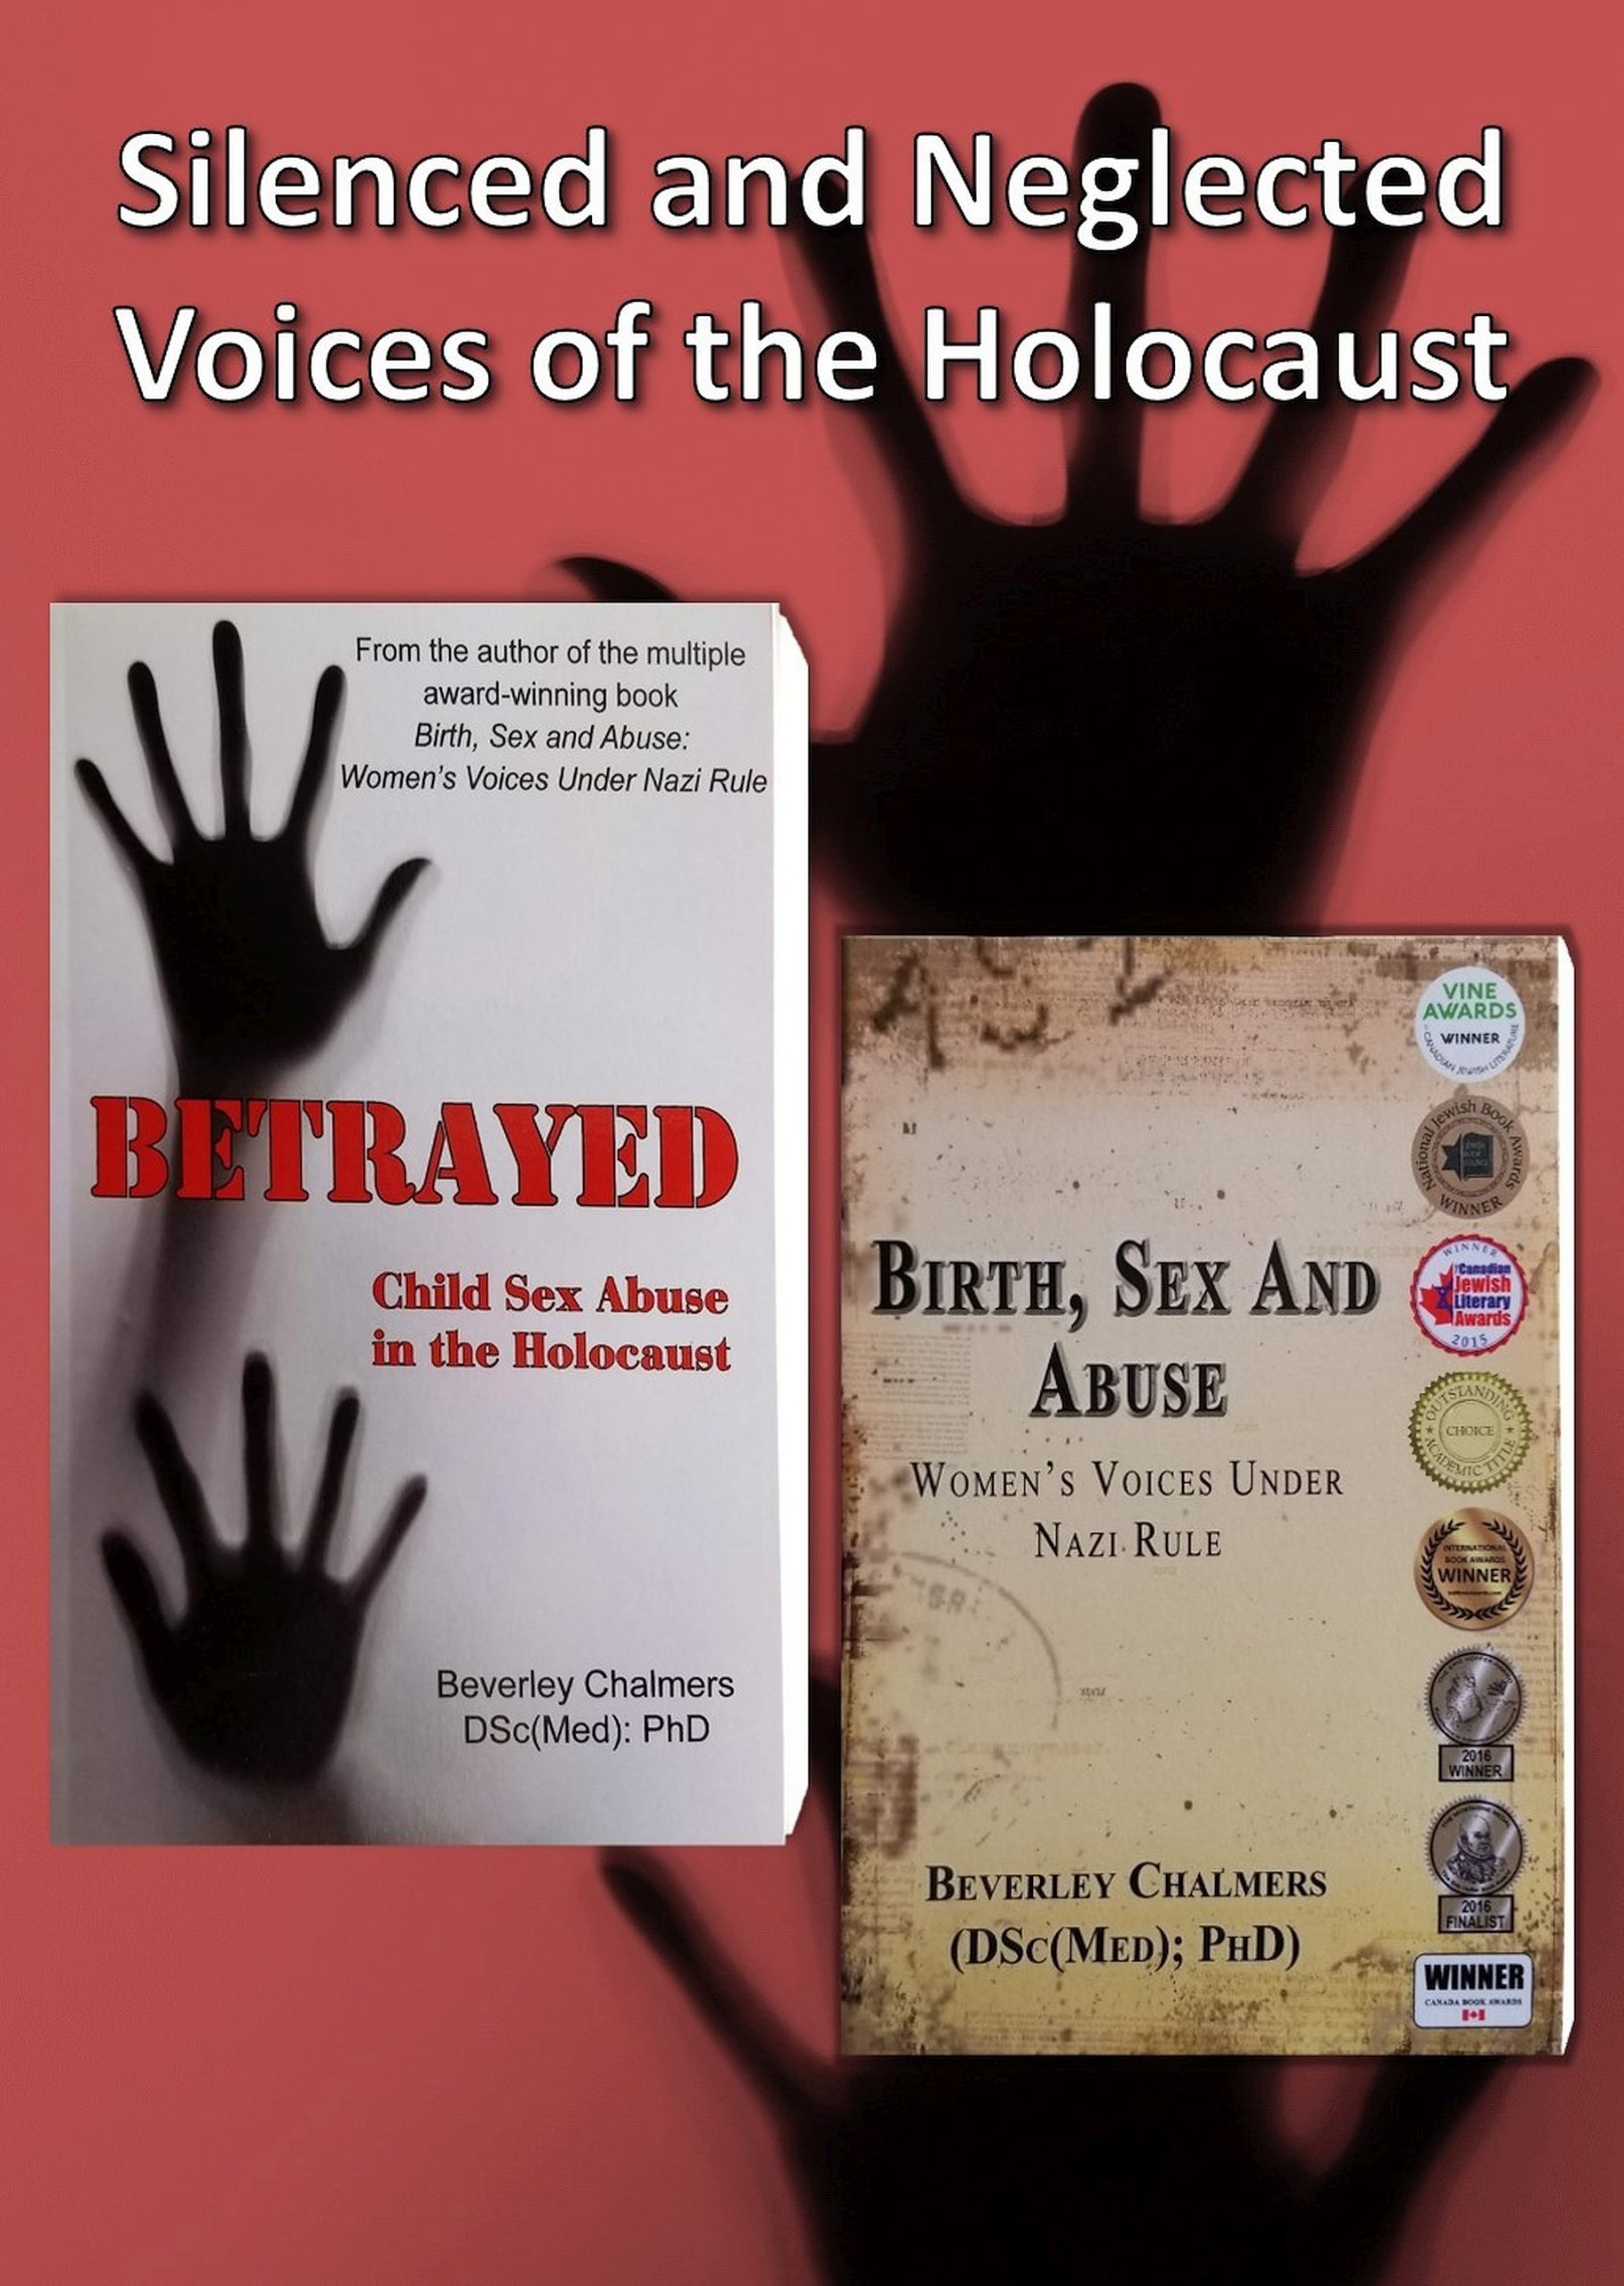 Two multi-award winning books about silenced and neglected victims of the Holocaust by Beverley Chalmers (DSc(Med);PhD) (www.bevchalmers.com) 